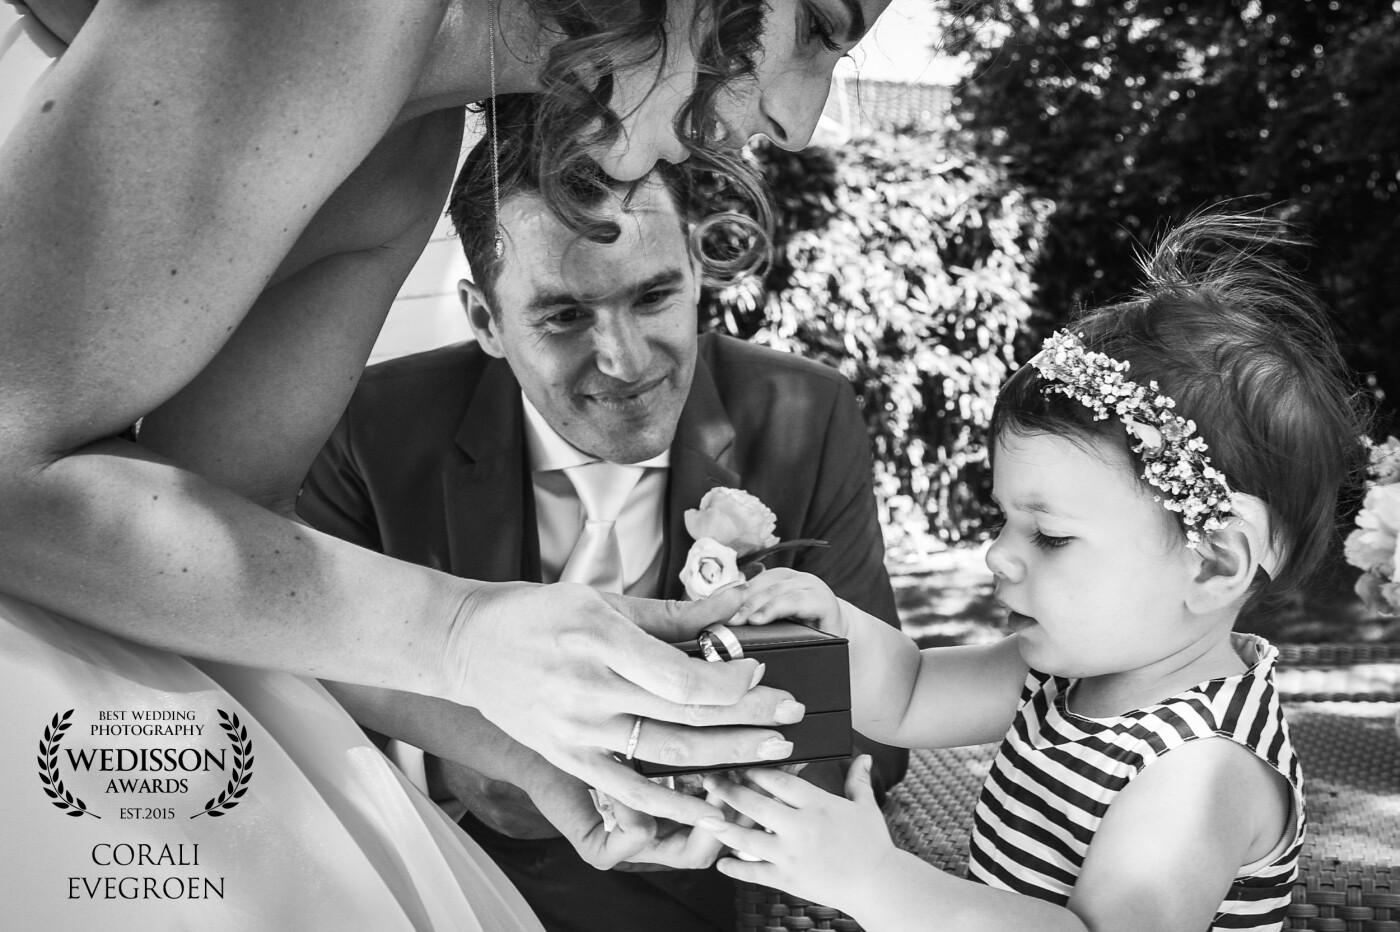 This little bridesmaid was given her parents the weddingrings. She did it perfect because it was a real serious job! It was a beautiful moment to capture!